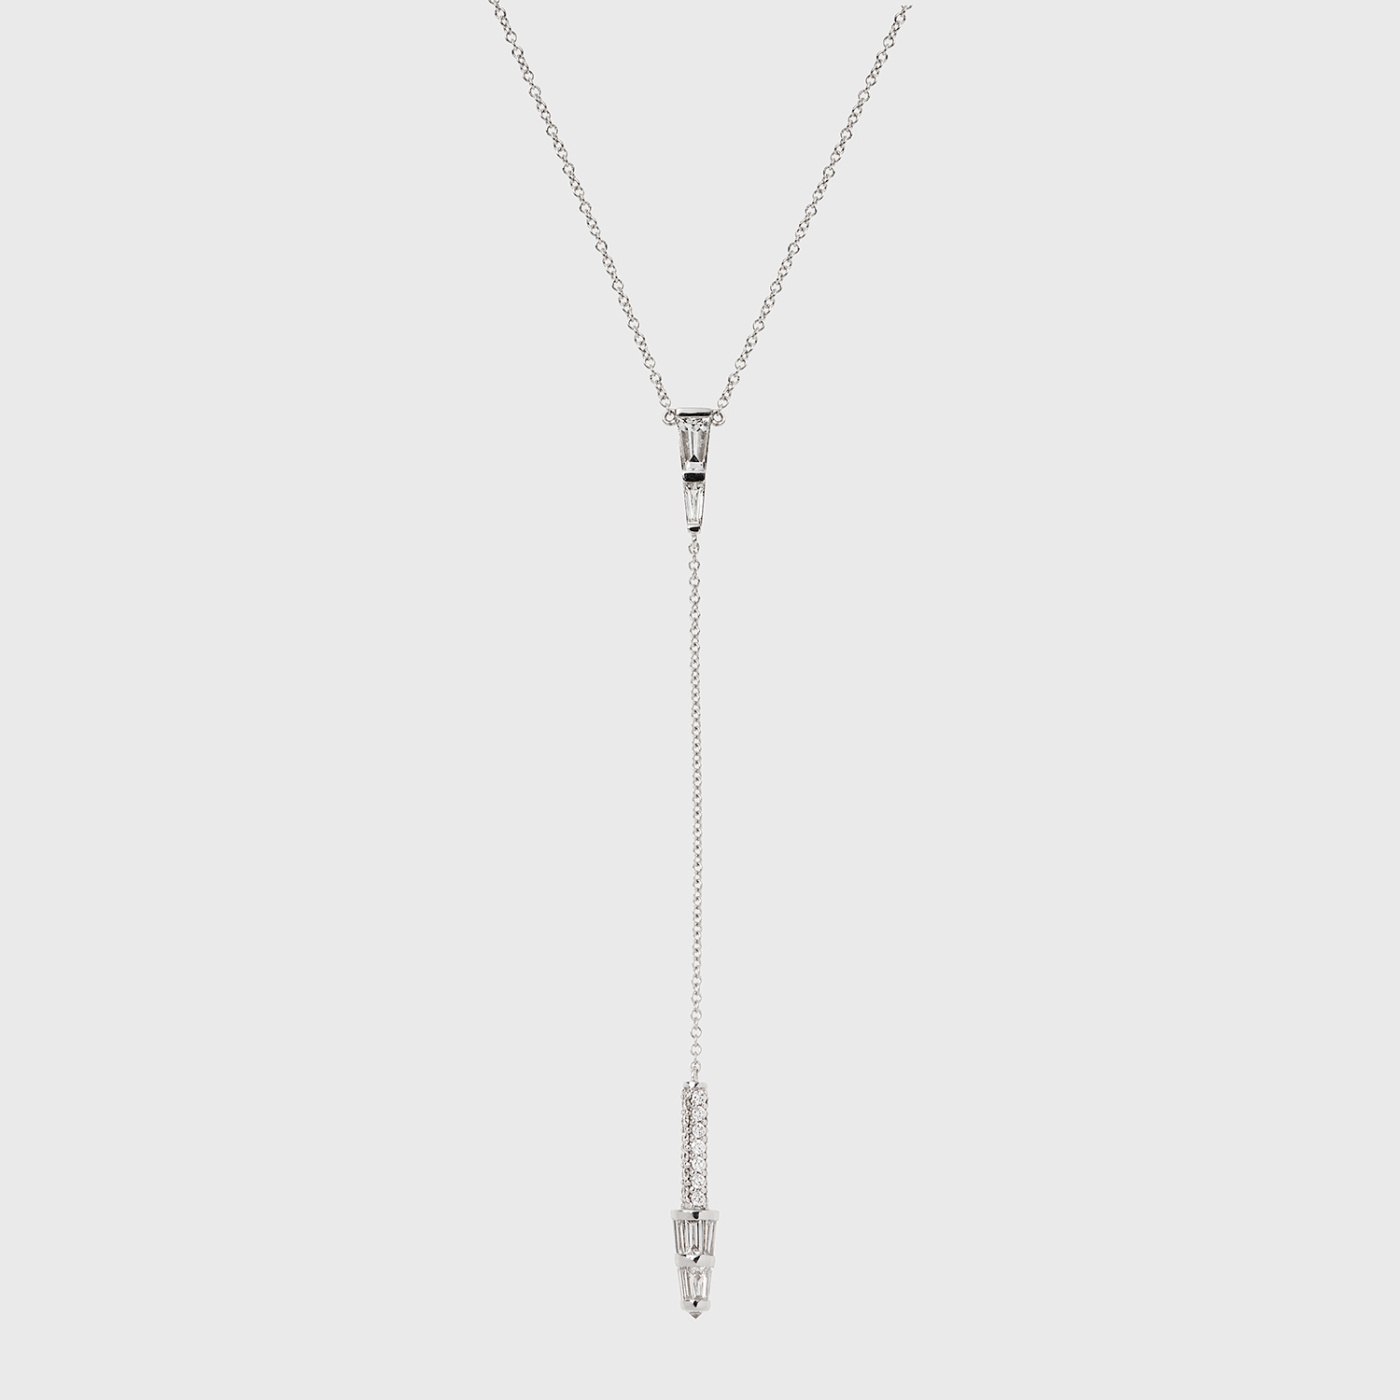 White gold long pendant necklace with white diamonds